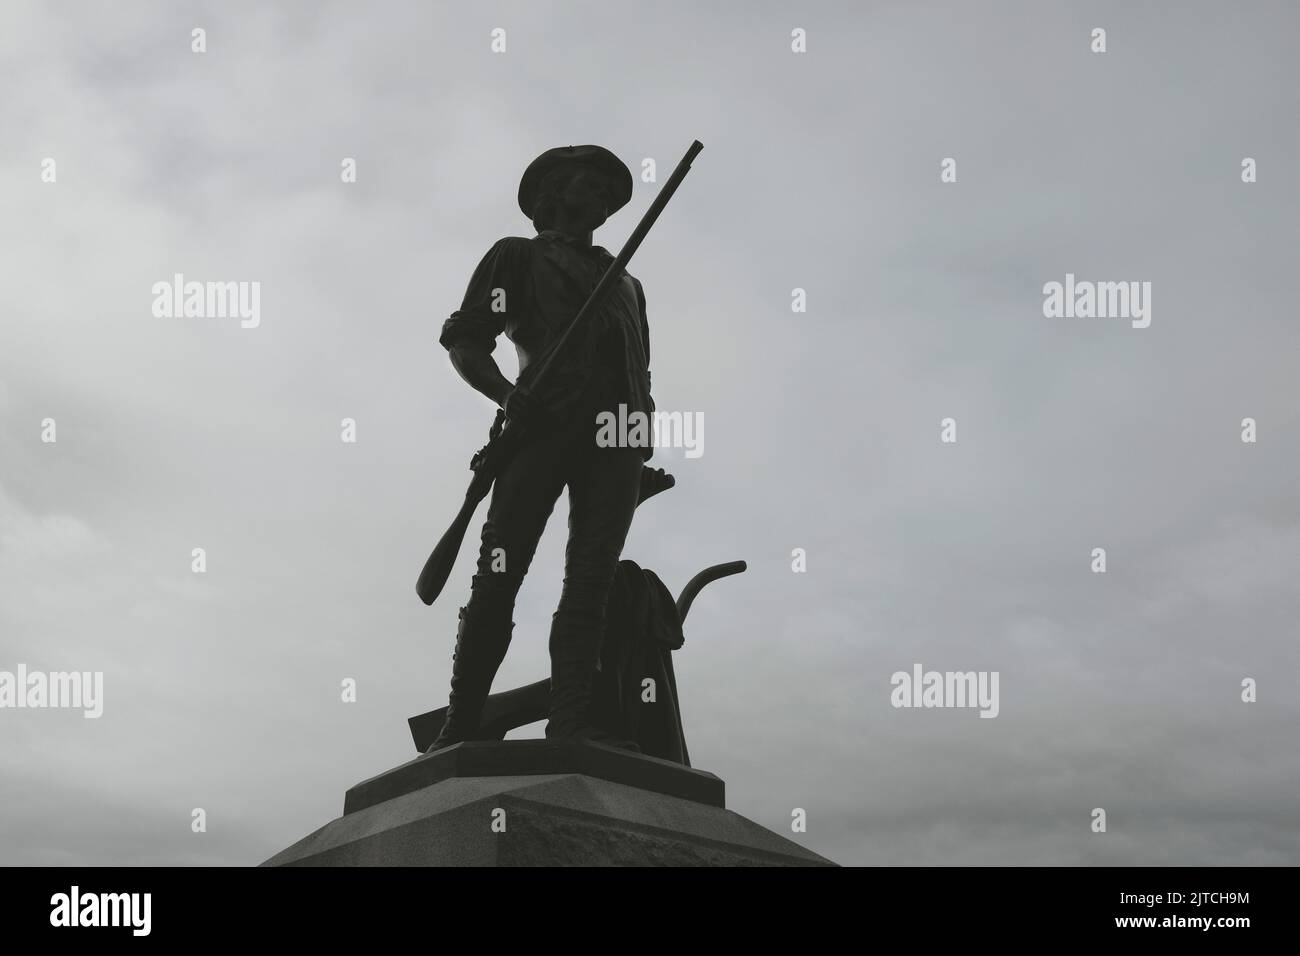 Silhouette of Minute Man Statue, Minute Man National Historical Park, Concord, Massachusetts, USA Stock Photo